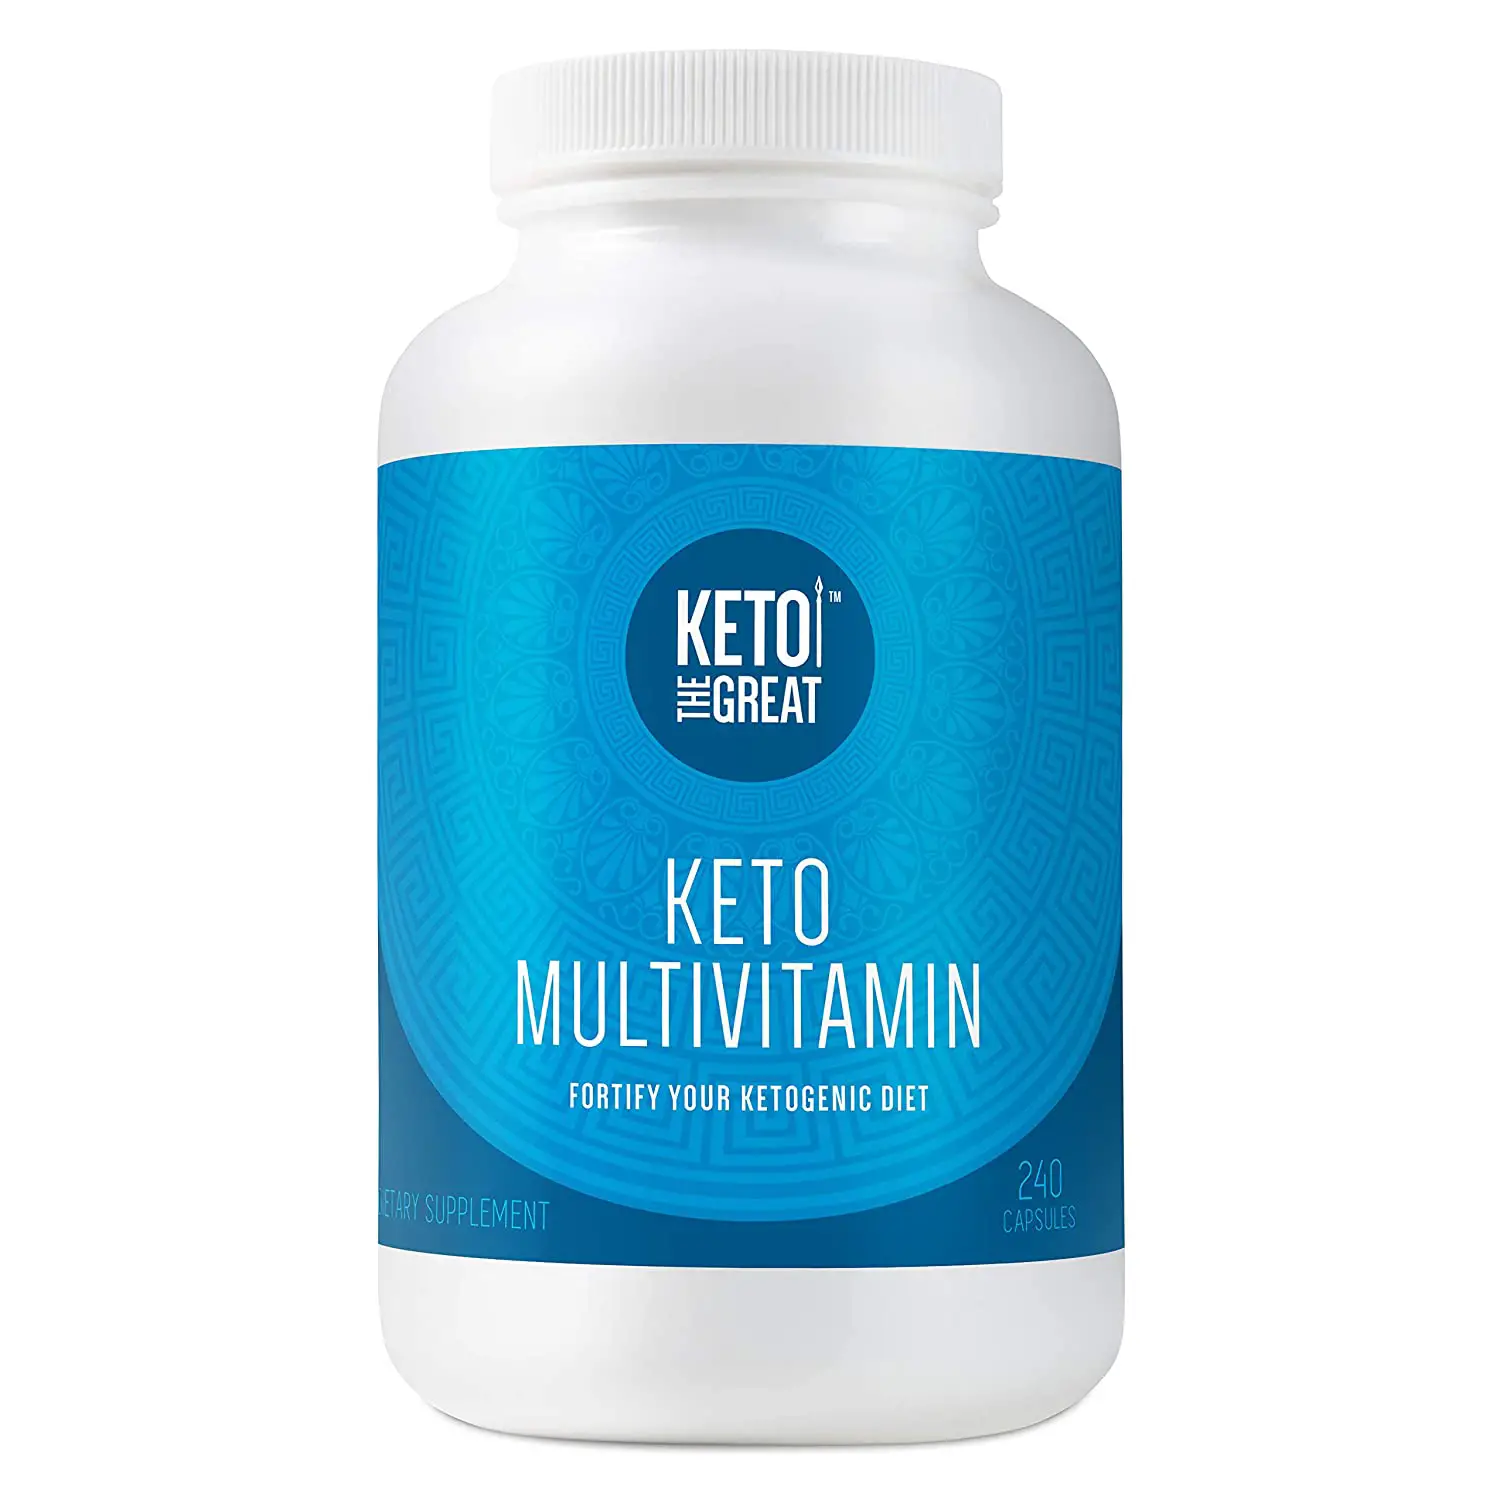 Should I Take A Multivitamin On The Keto Diet